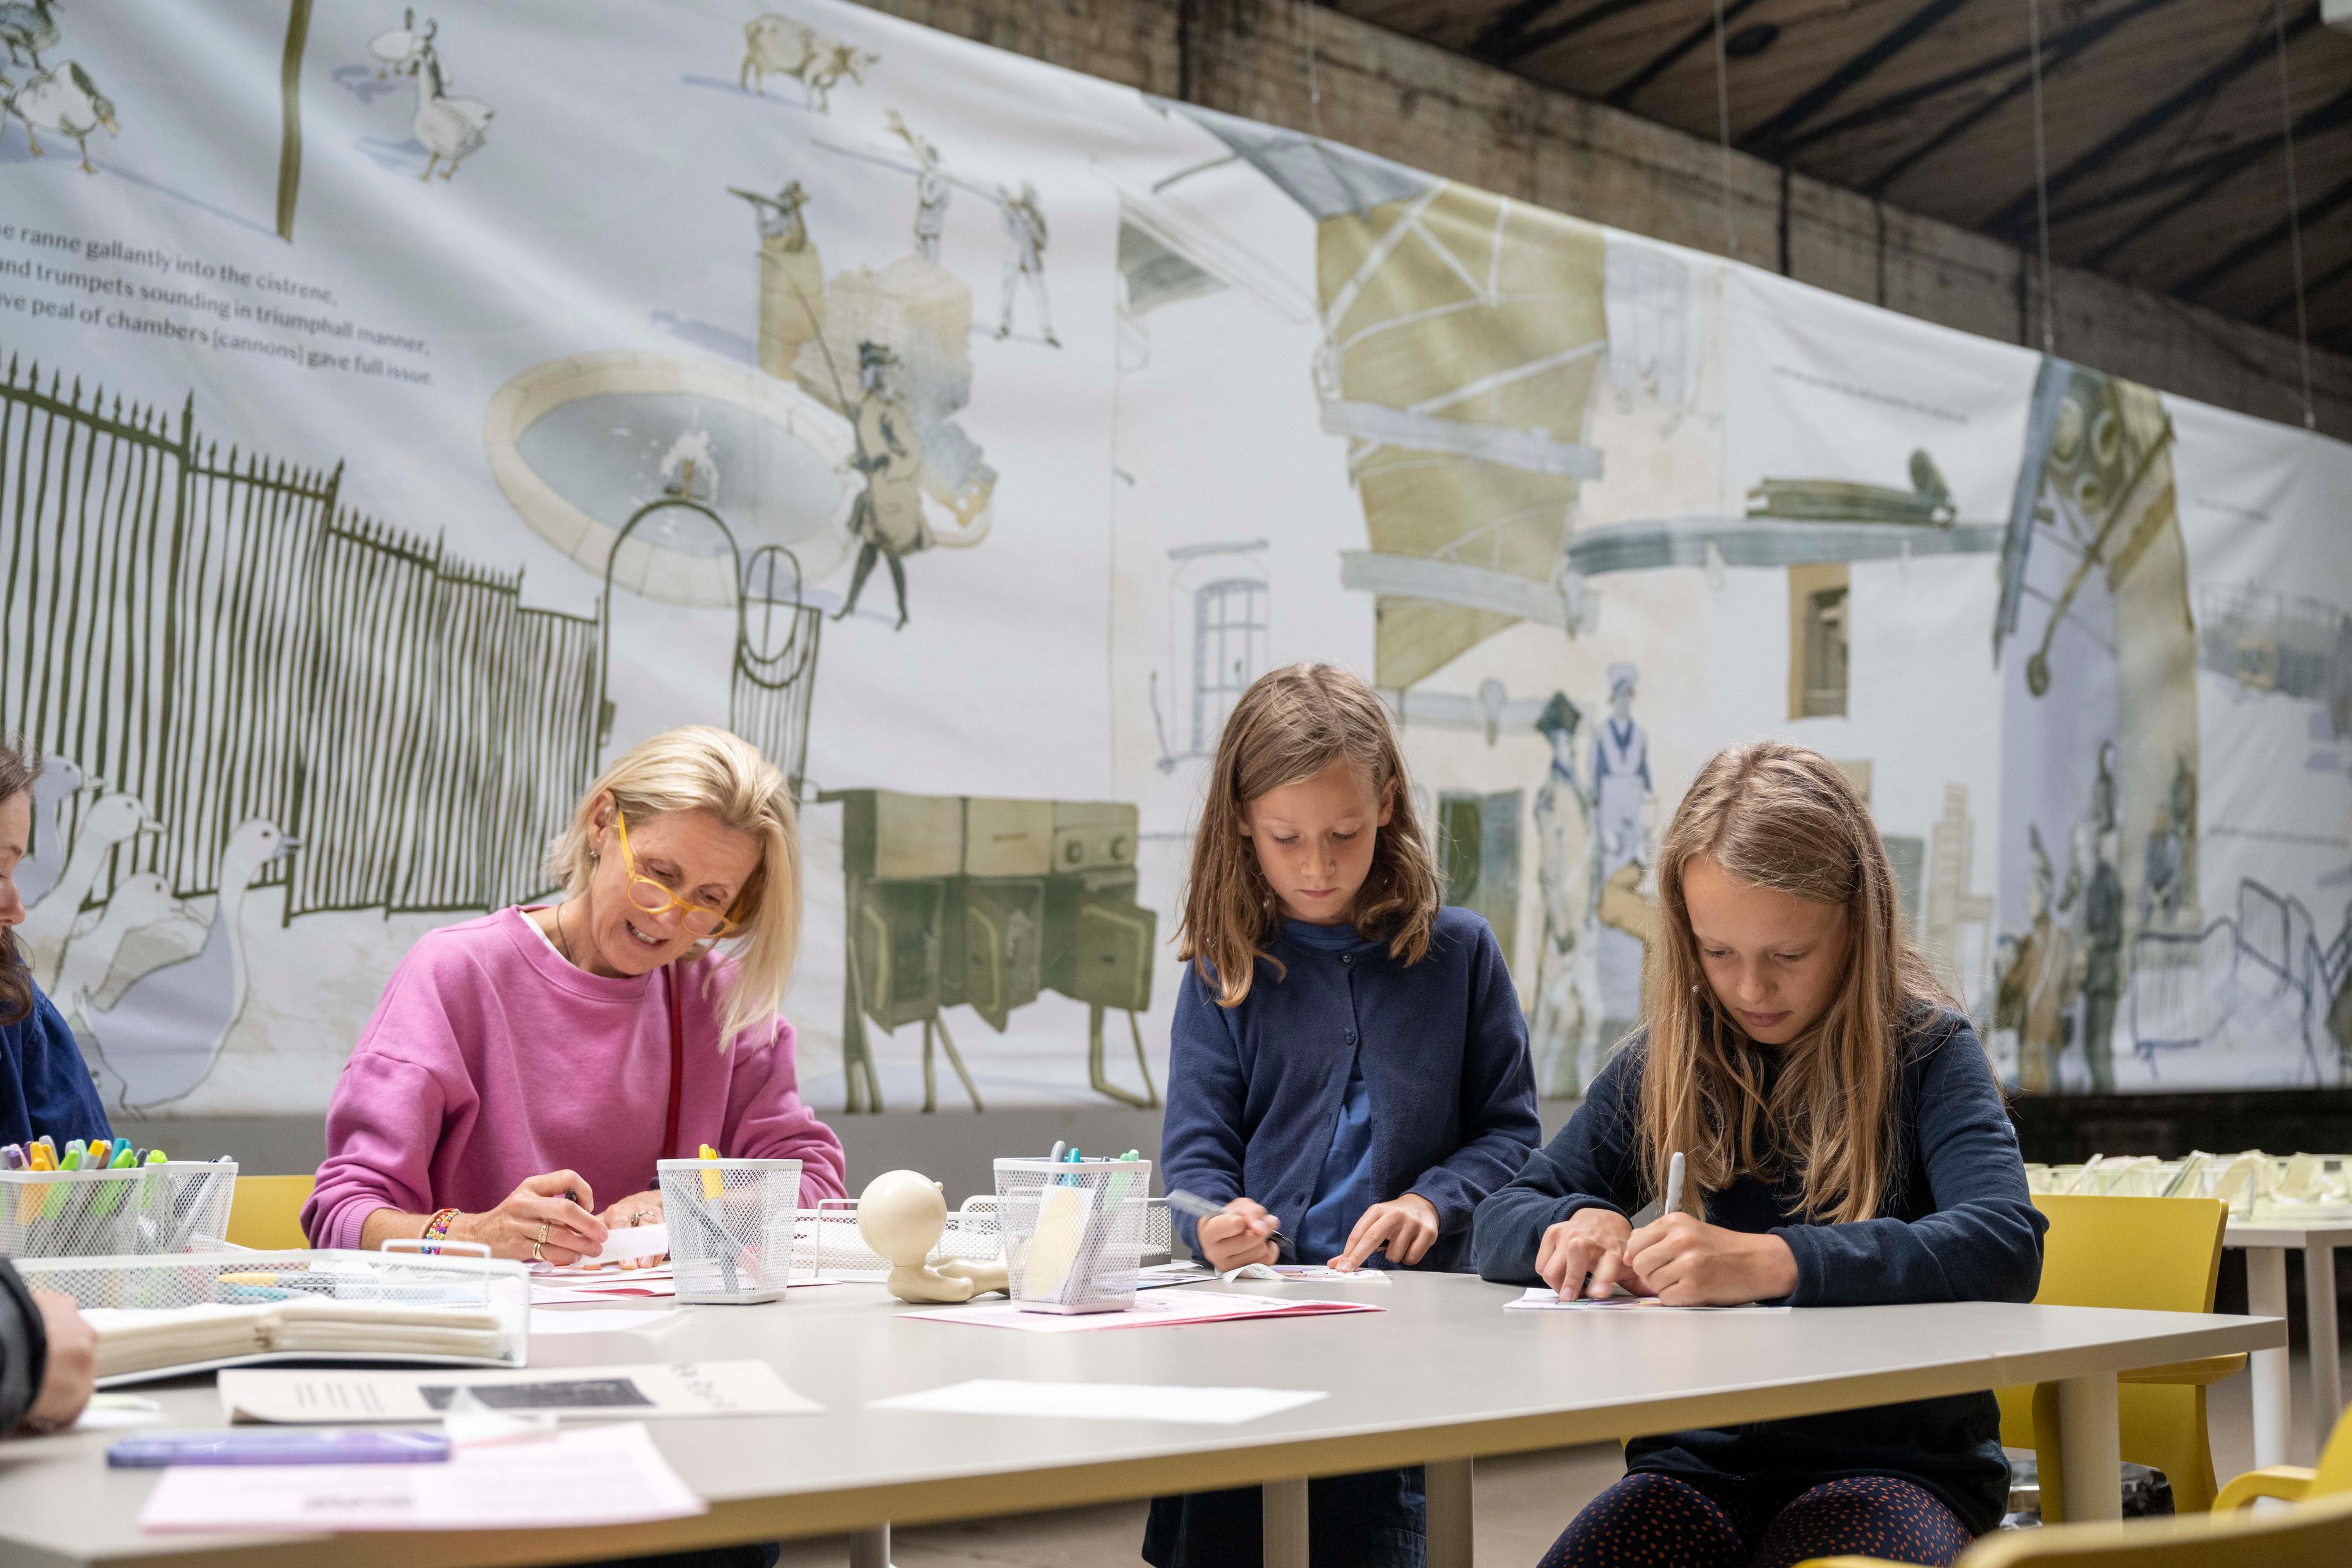 Photograph of people creating art at a table.